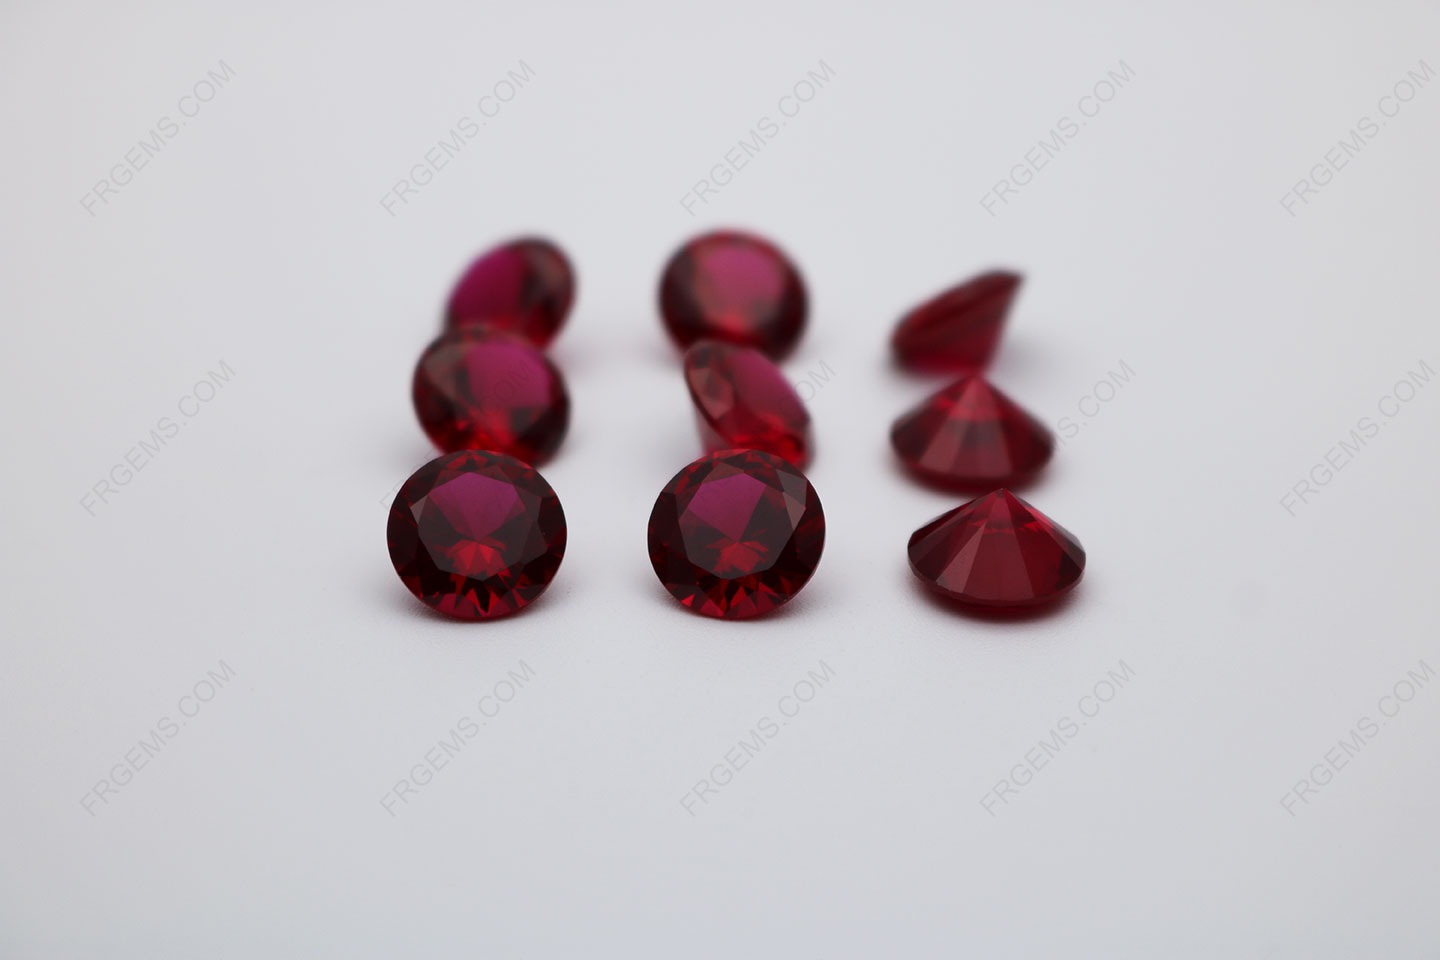 Corundum Synthetic Ruby Red 7# Round Shape Faceted Cut 8.00mm stones IMG_0272